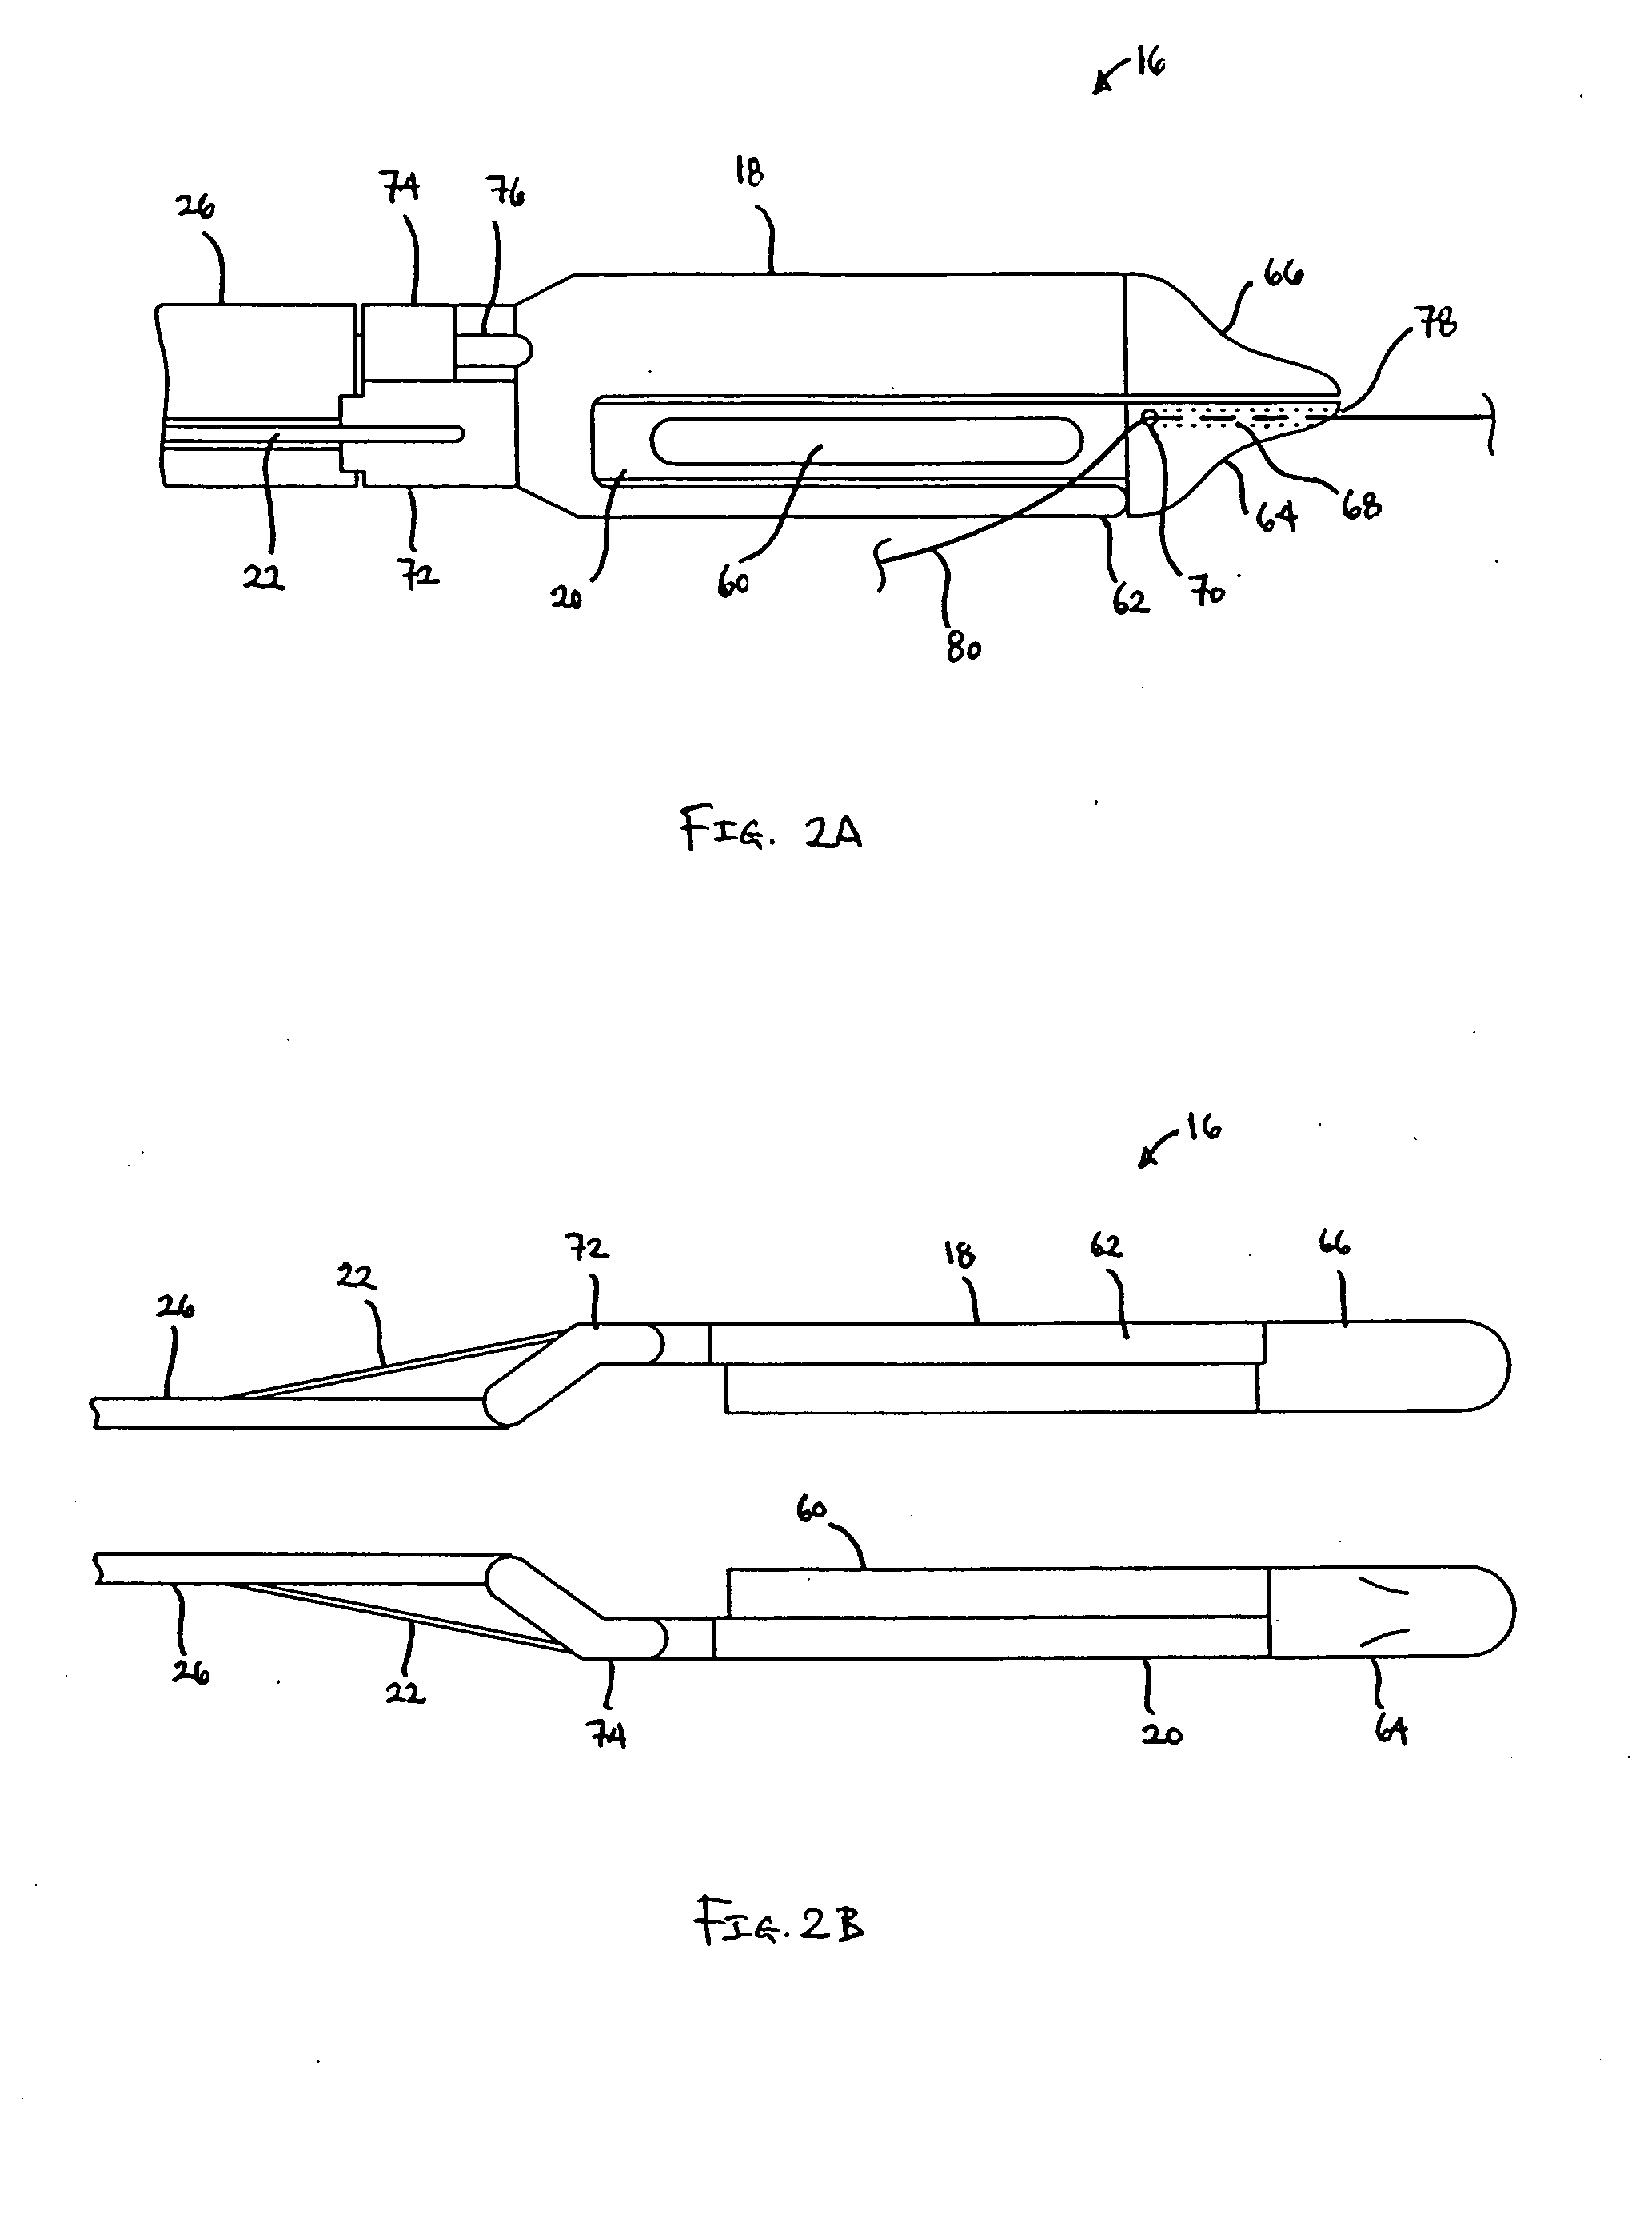 System for tissue approximation and fixation